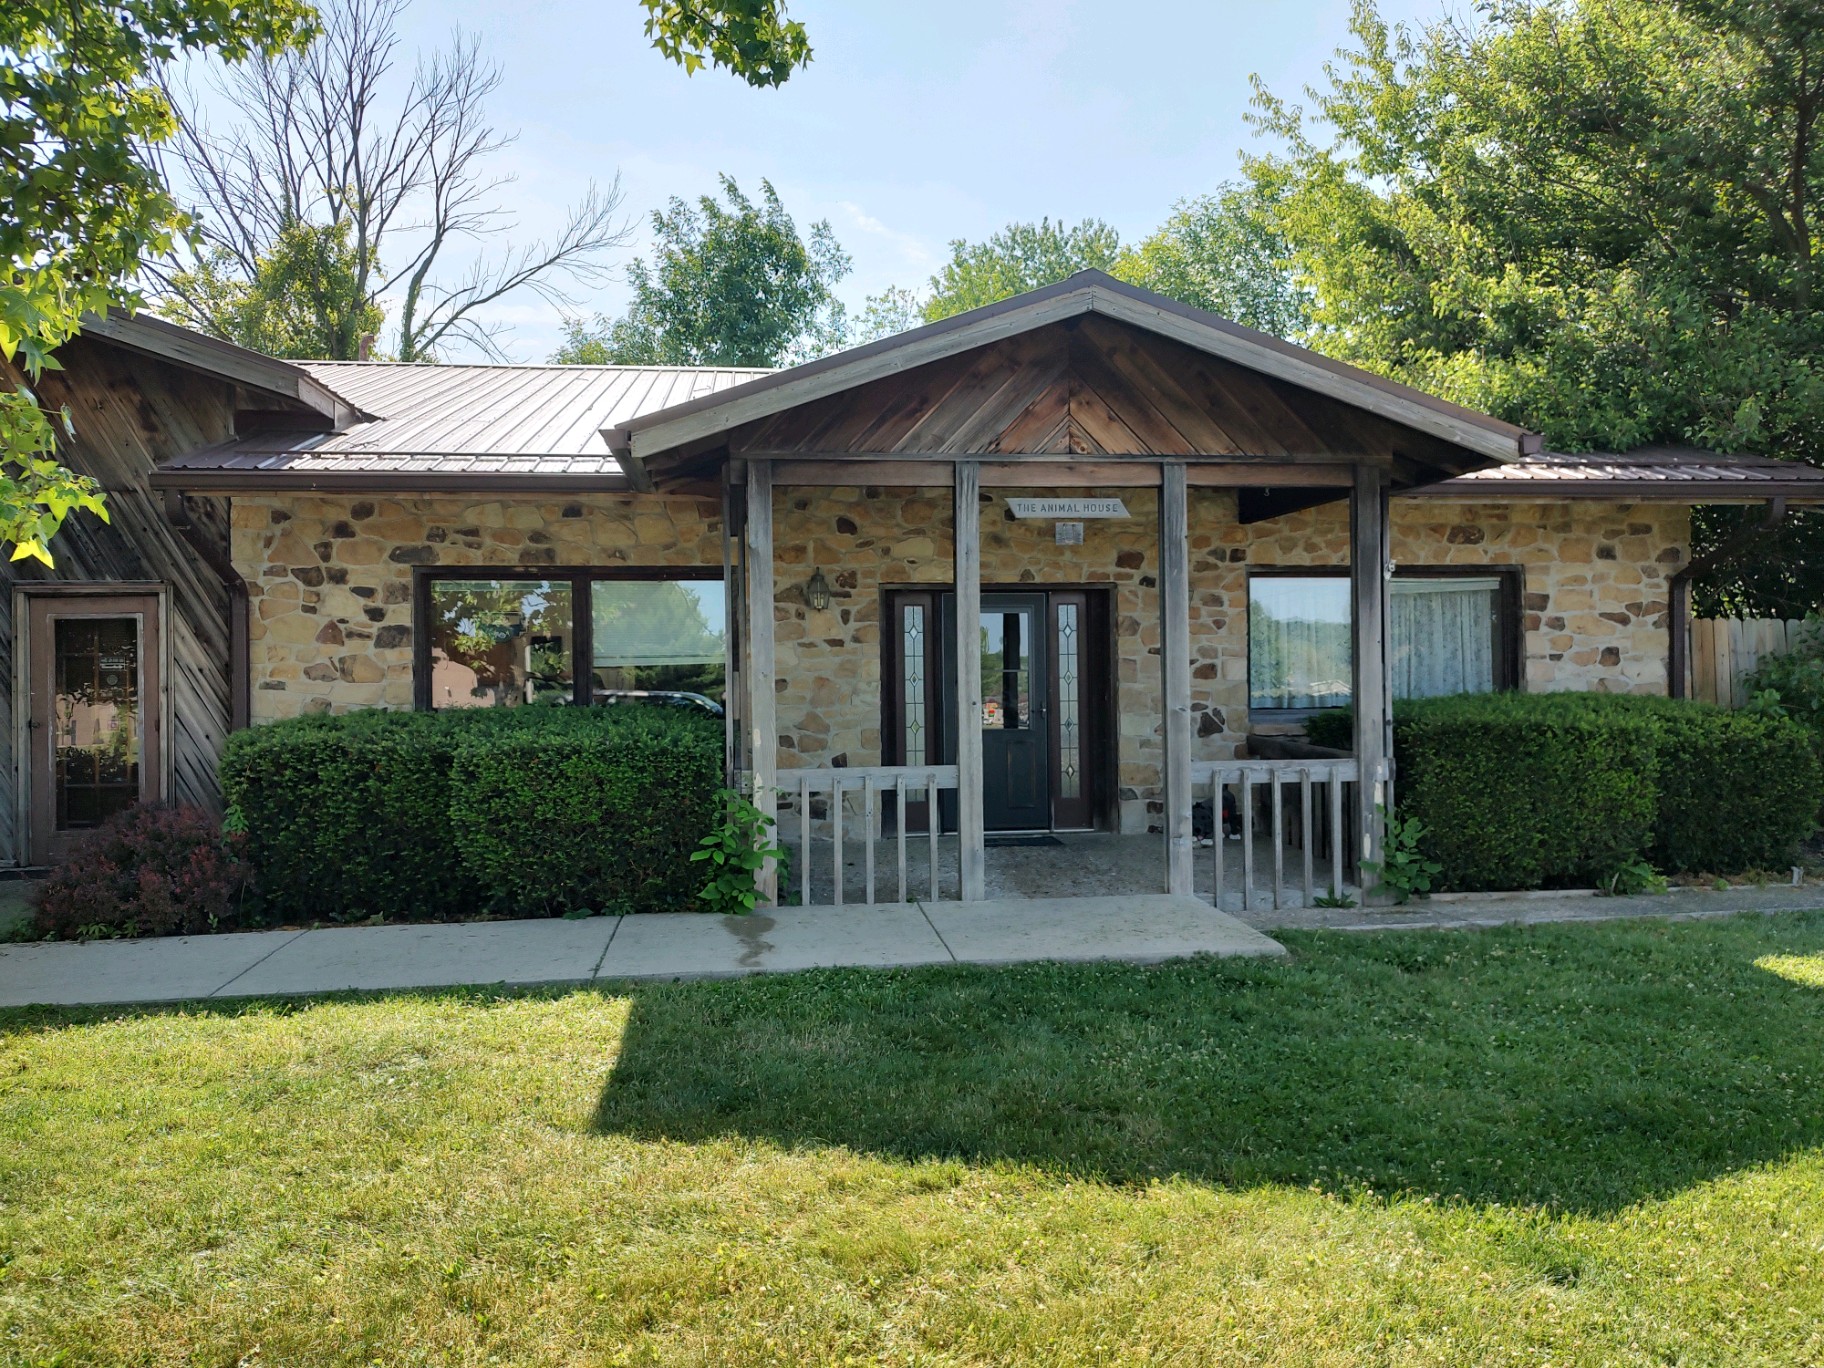 Spencer Town & Country Veterinary Clinic 29 Bob Babbs Rd Dr, Spencer Indiana 47460